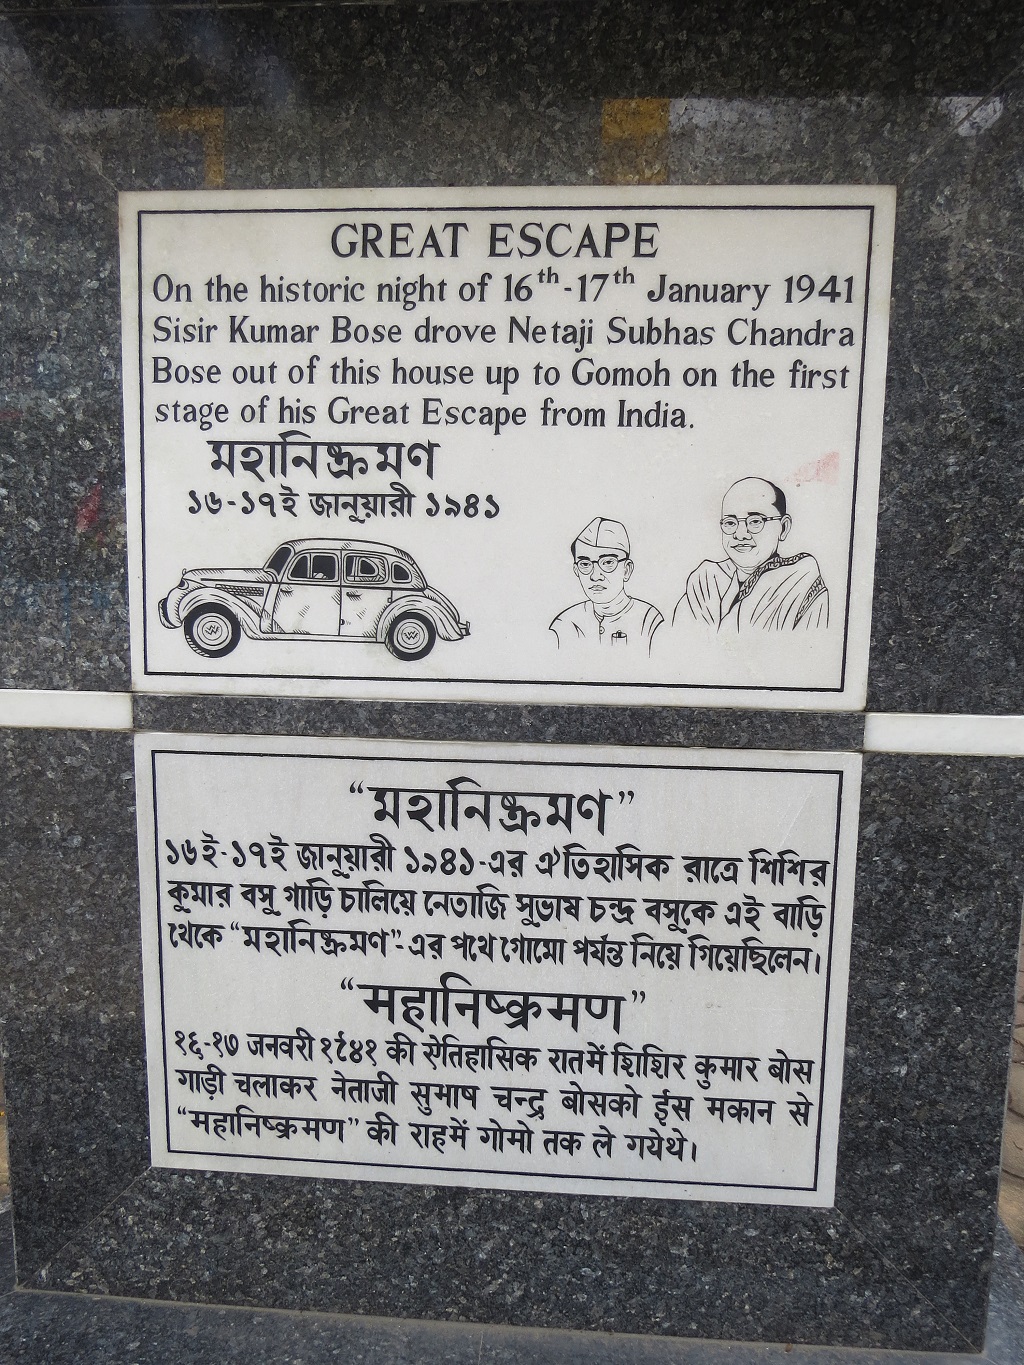 About - Netaji's Great Escape from India